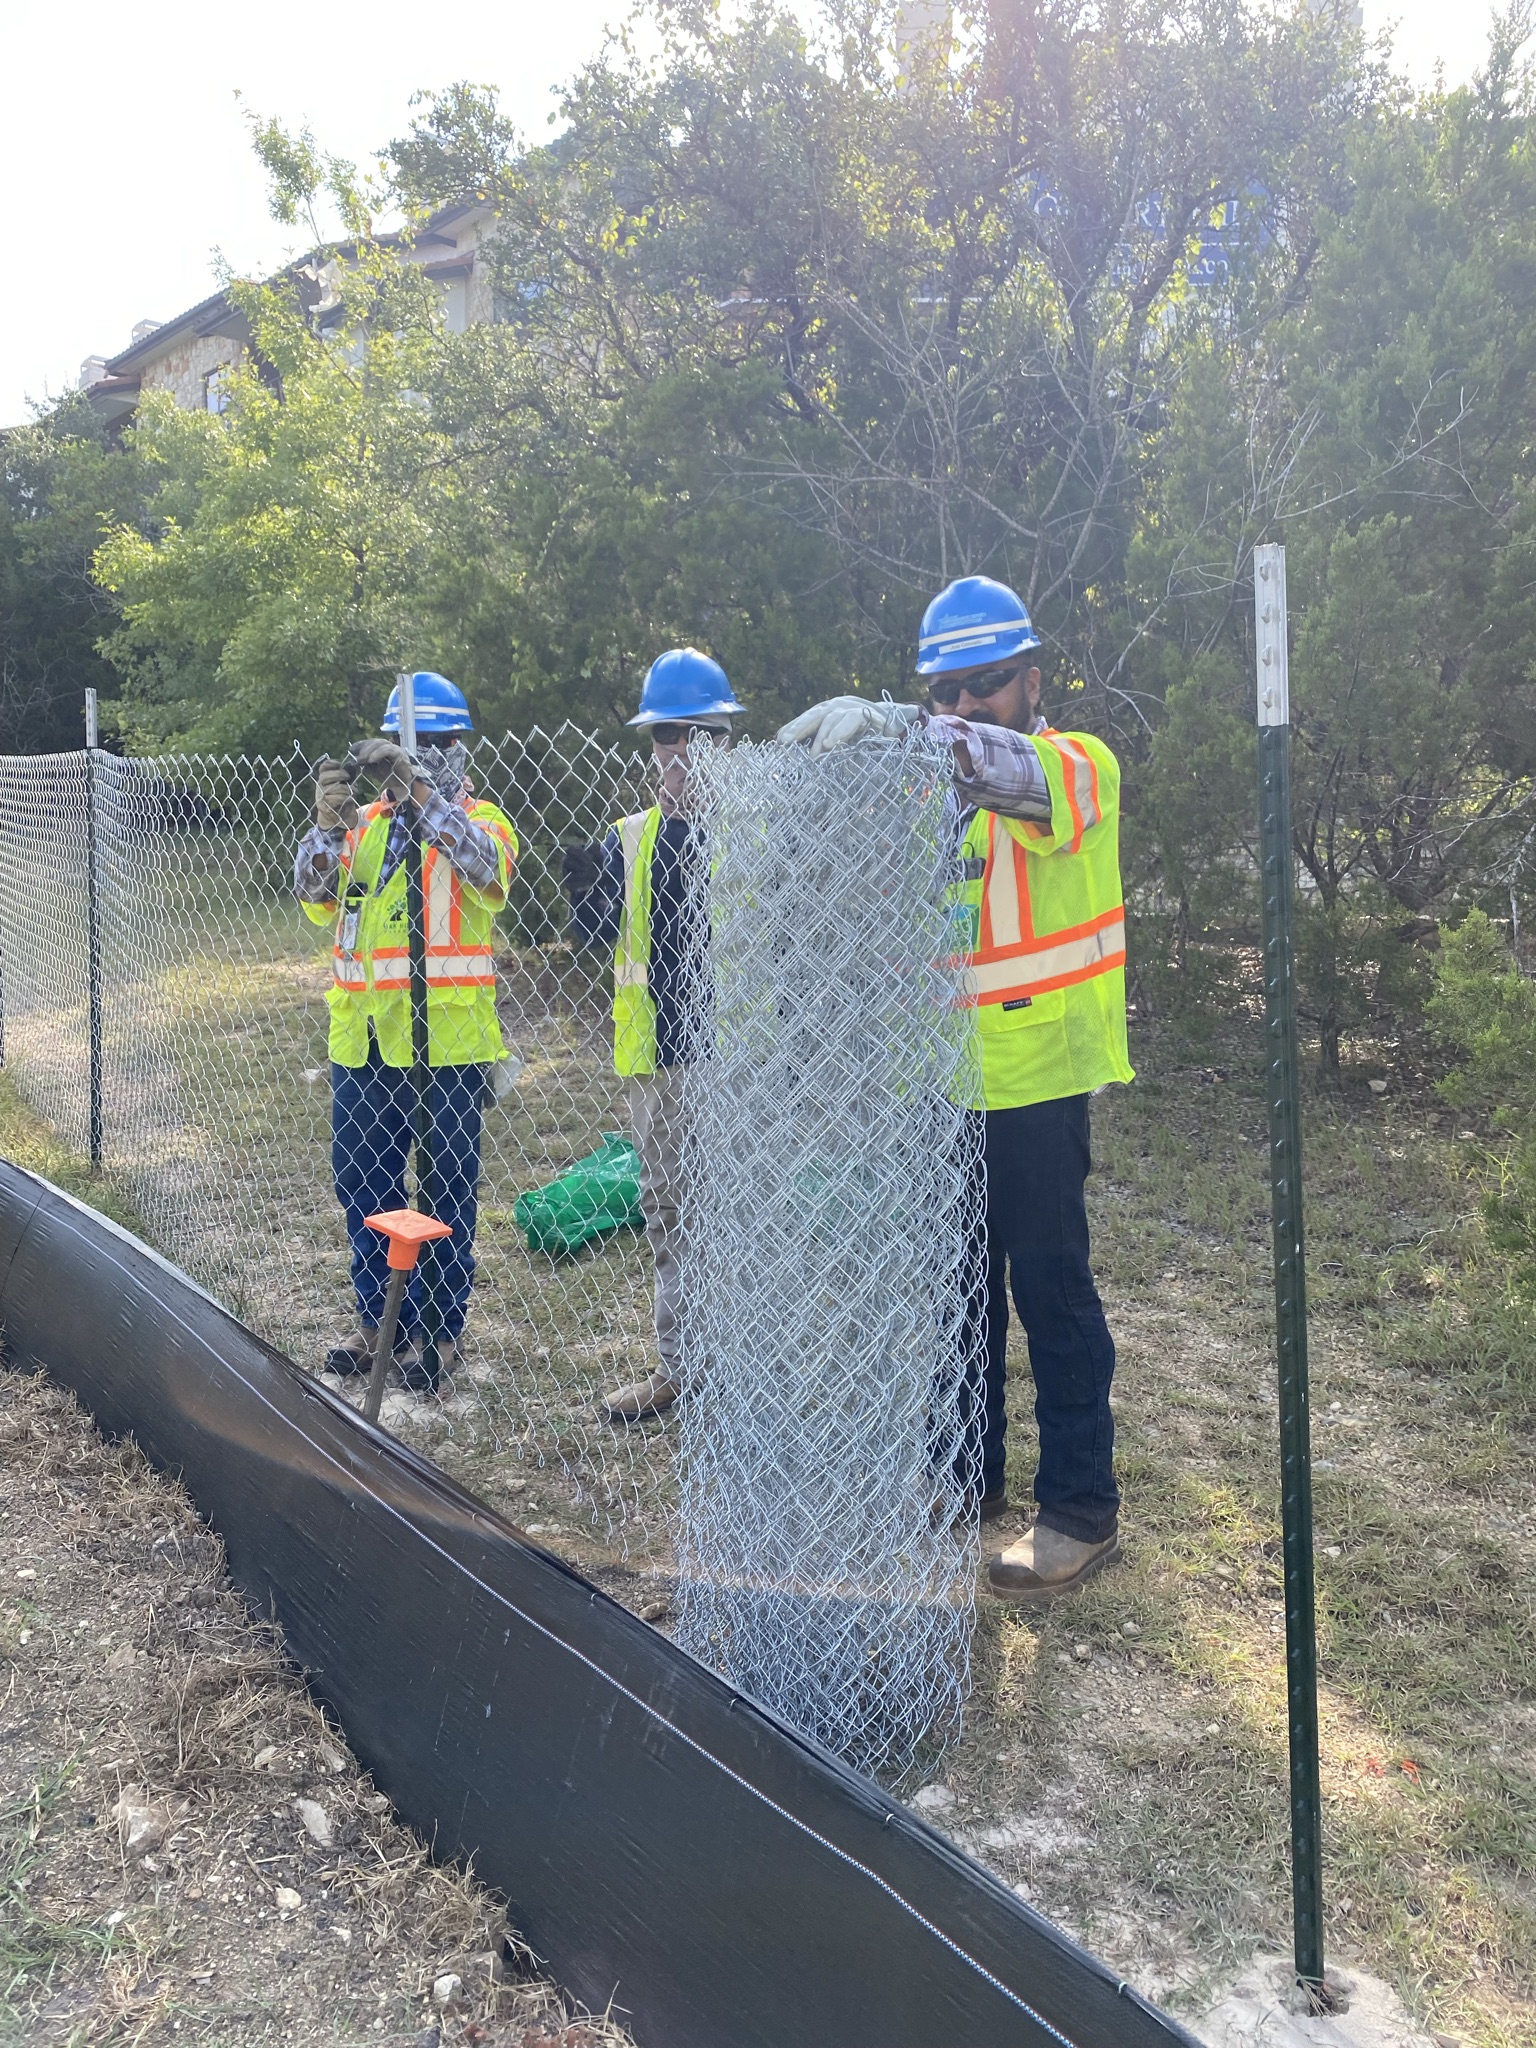 Crews install a fence between the Bell Quarry Hill apartments and state right-of-way off of US 290. Separating construction work areas from nearby apartments, homes and businesses are some important safety measures taking place before major work on Oak Hi